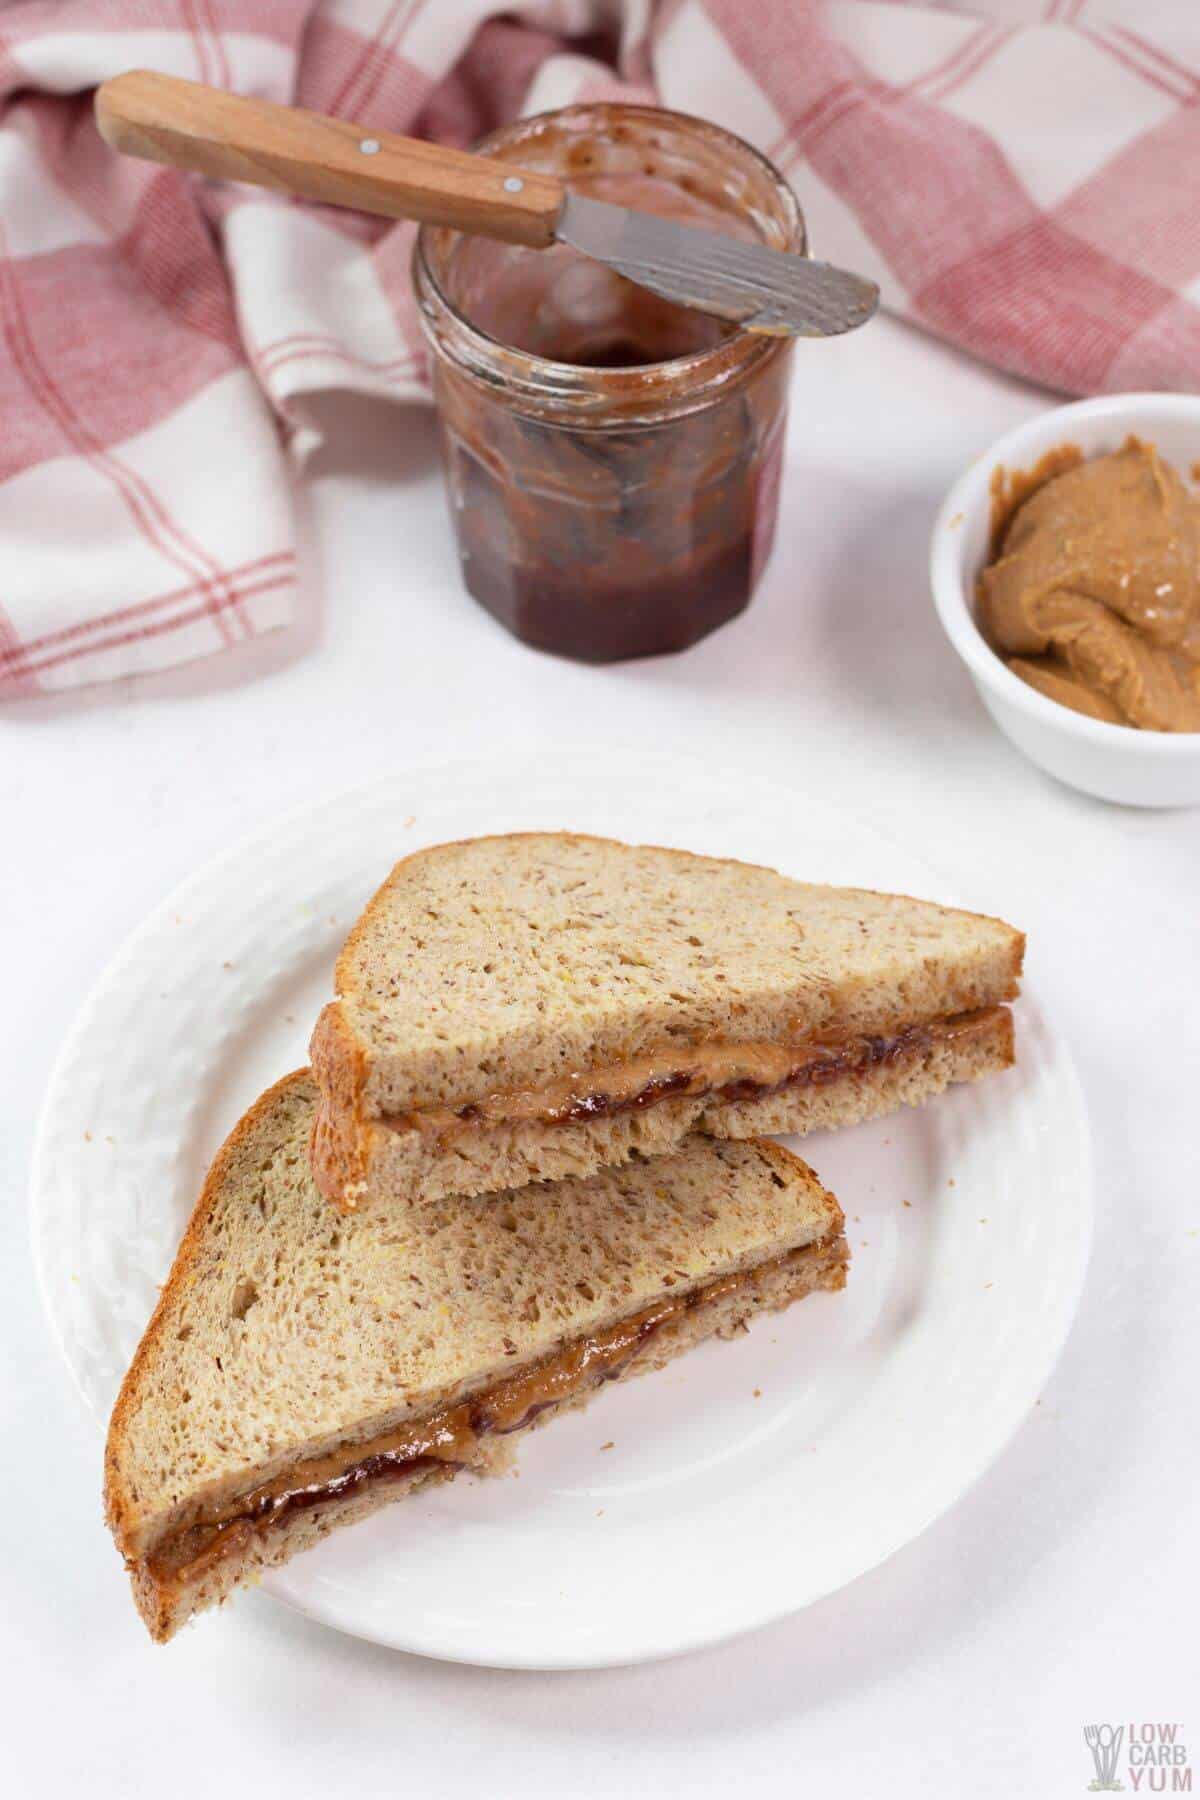 keto peanut butter and jelly sandwich 